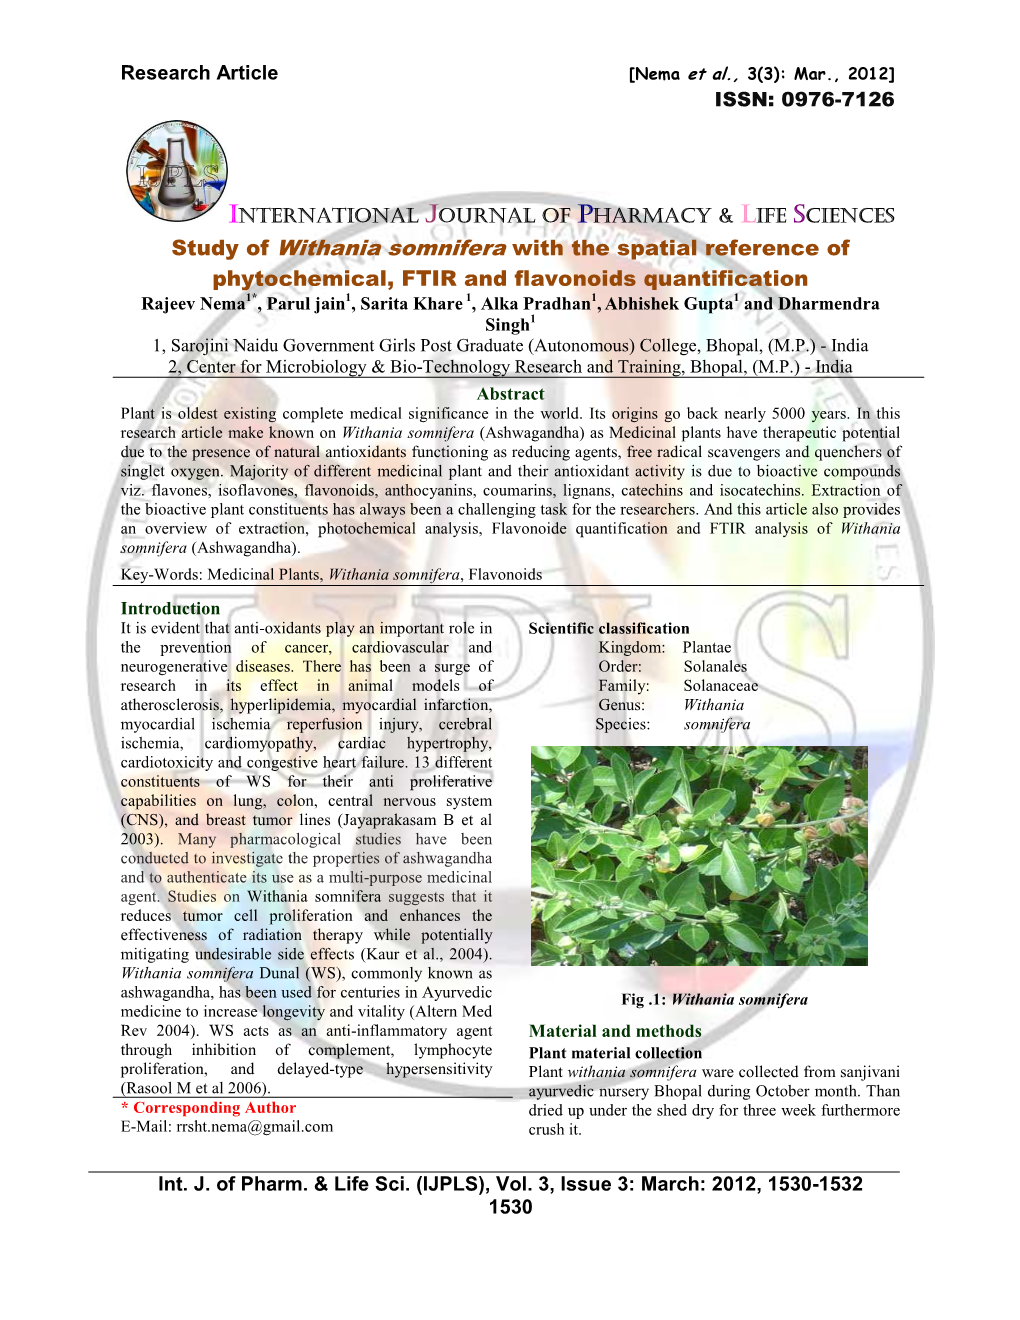 Study of Withania Somnifera with the Spatial Reference of Phytochemical